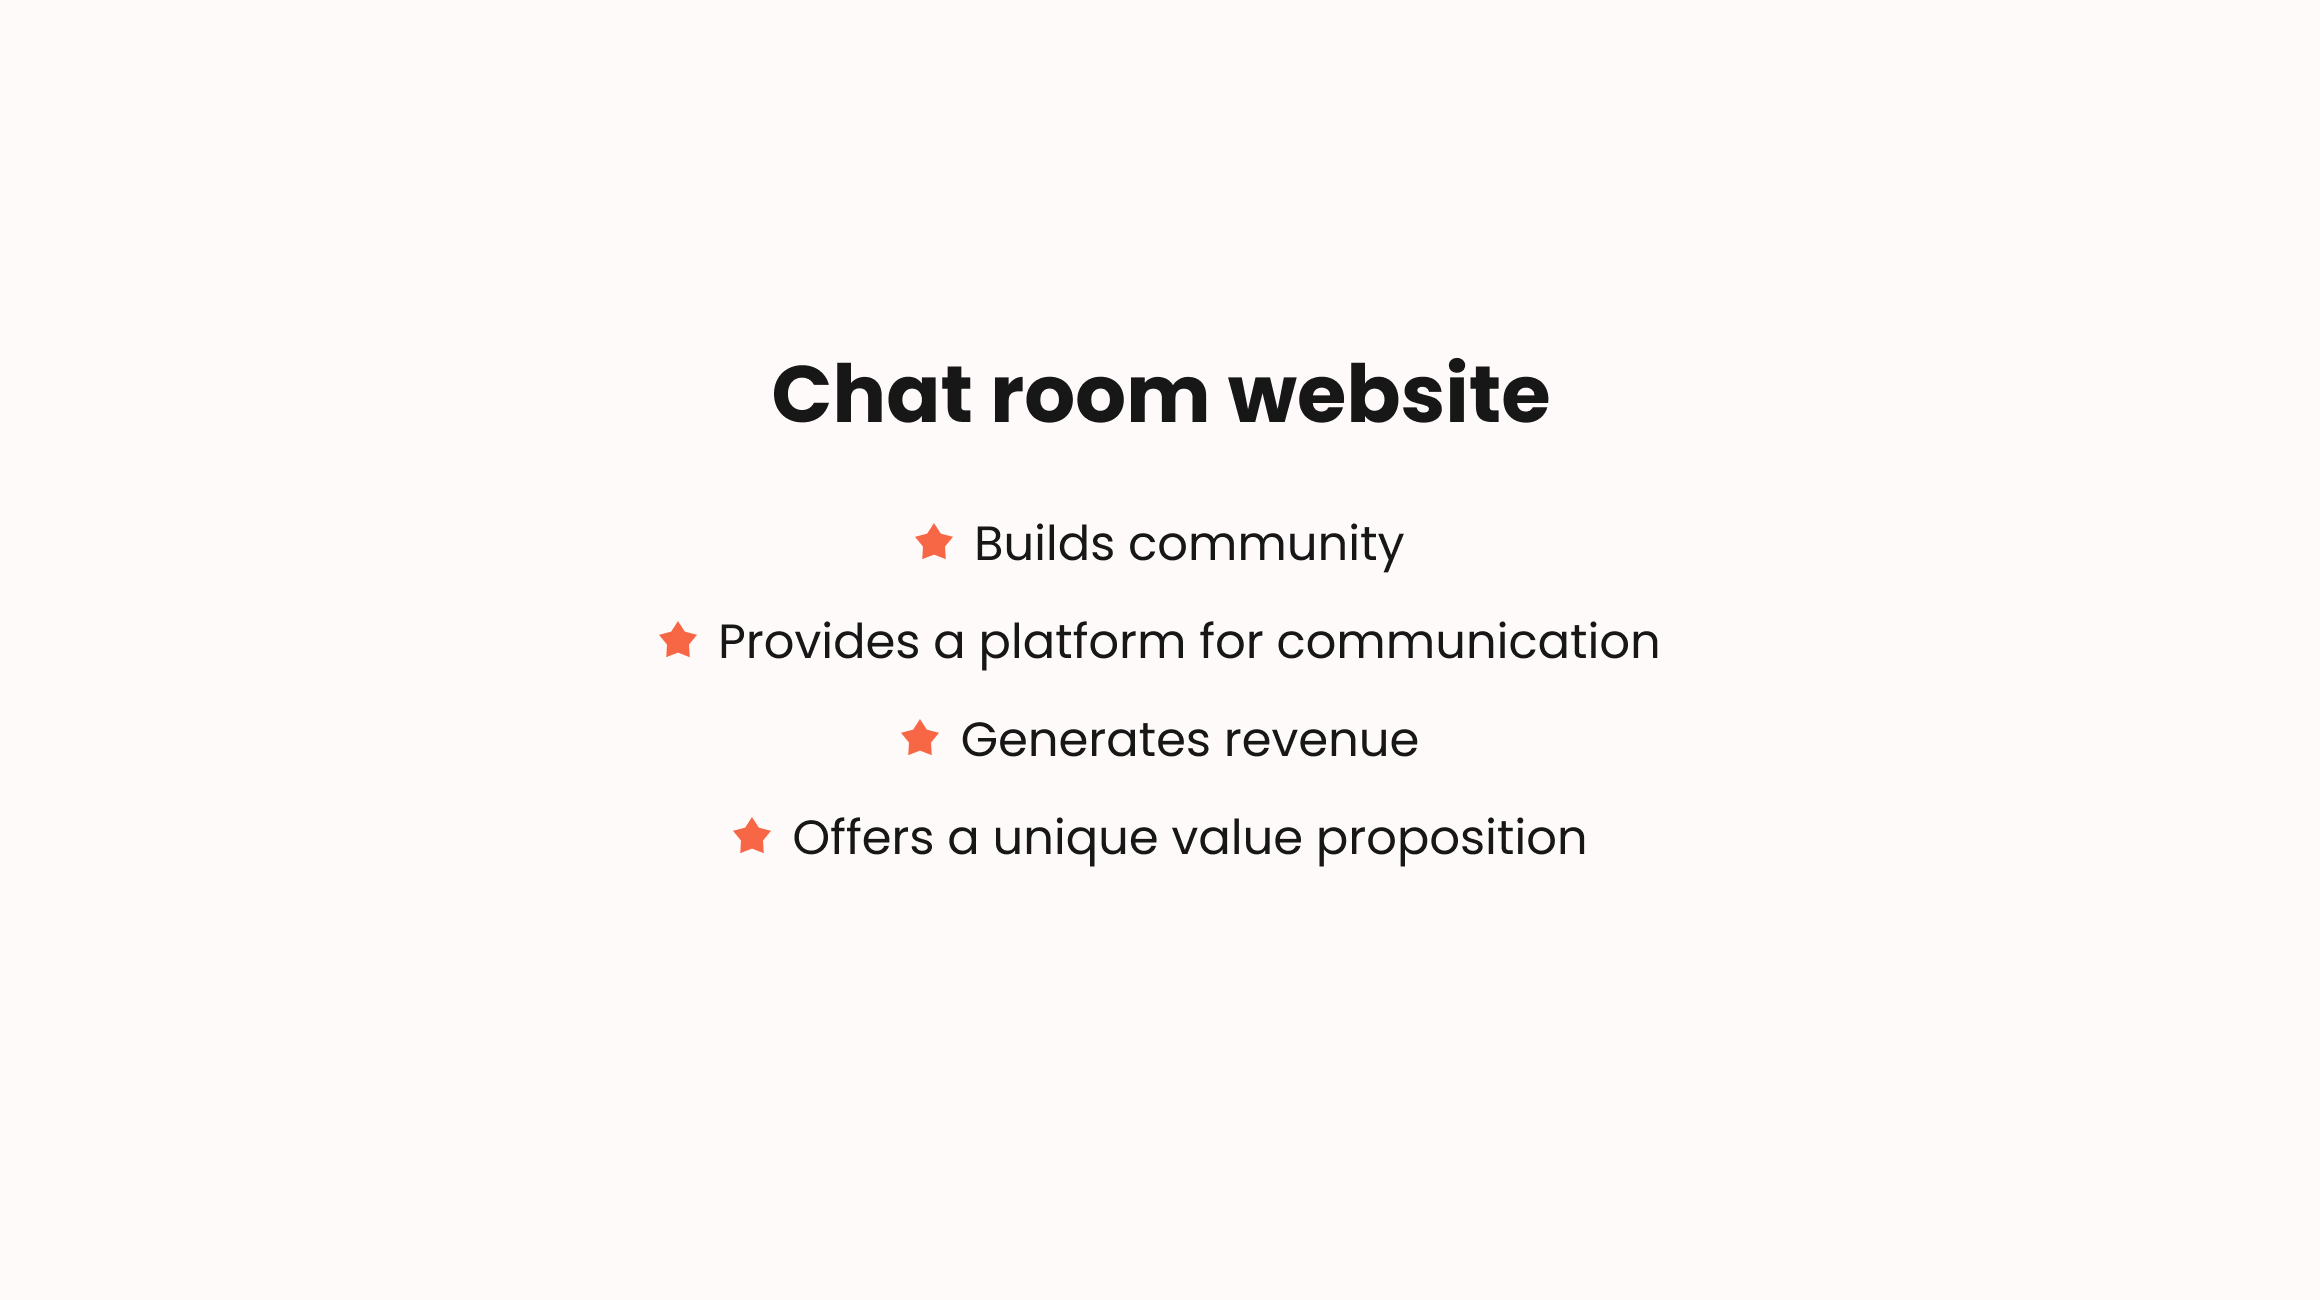 Why build chat room site